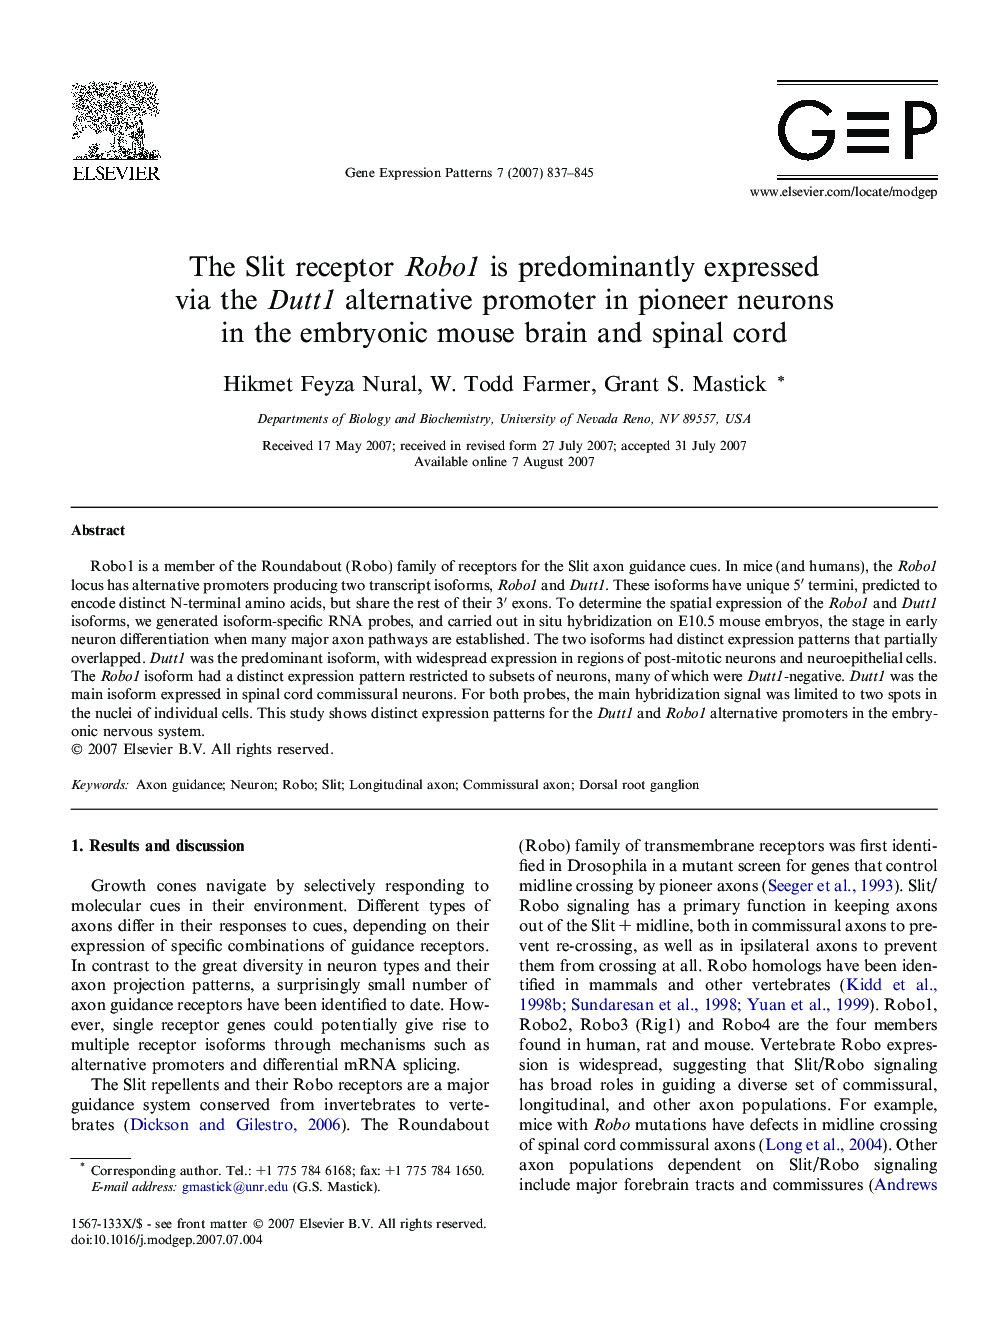 The Slit receptor Robo1 is predominantly expressed via the Dutt1 alternative promoter in pioneer neurons in the embryonic mouse brain and spinal cord